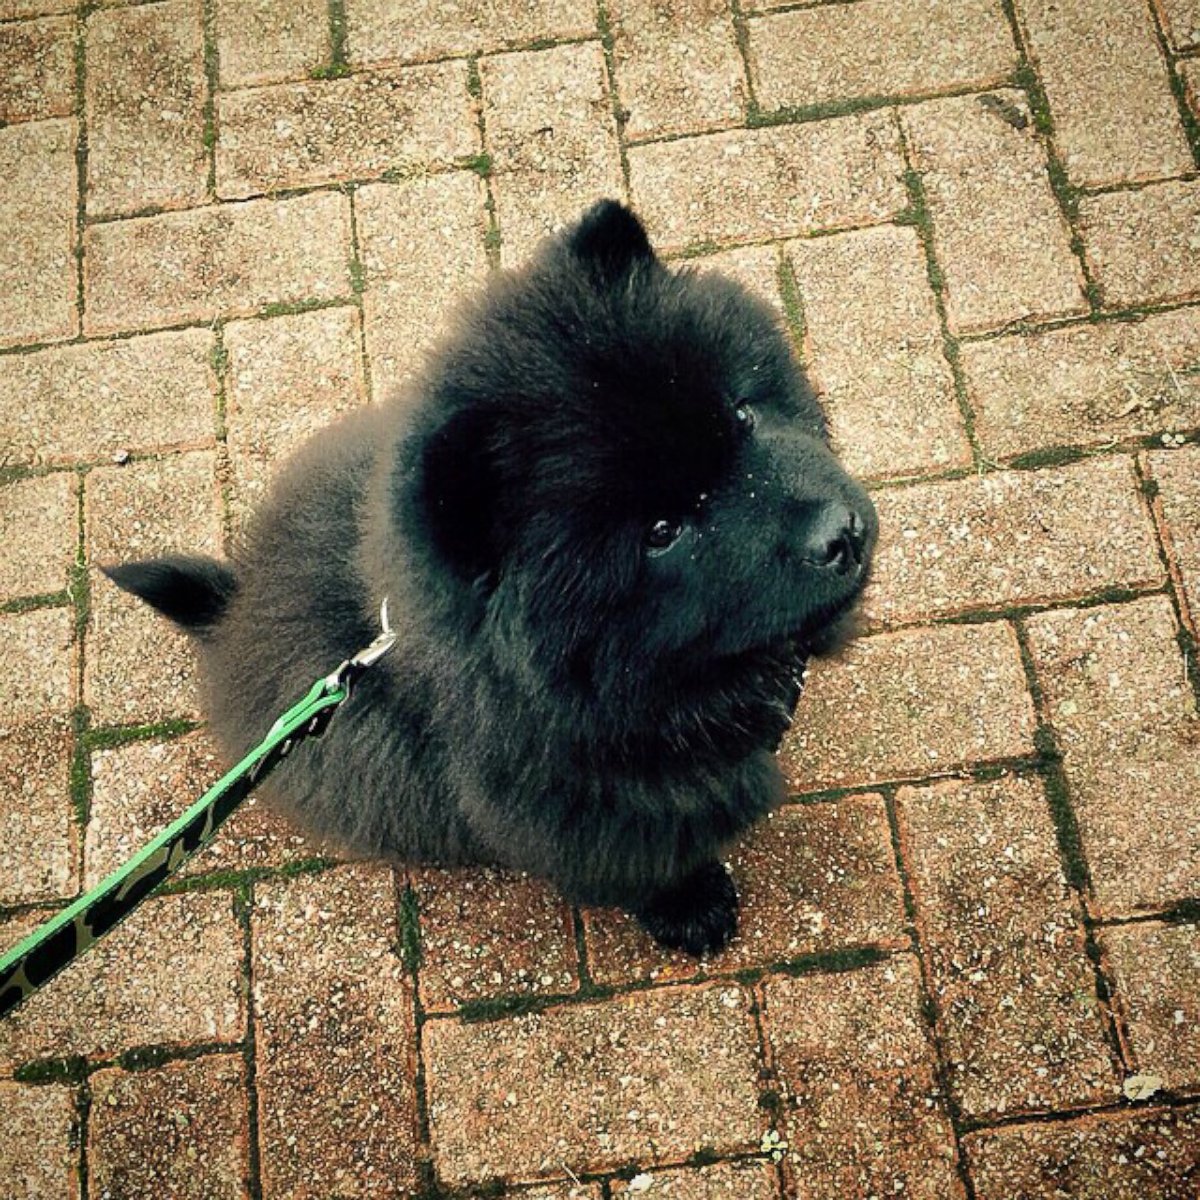 PHOTO: Misiu Green, 3-month-old Chow Chow puppy, is seen in this photo posted to Instagram on Oct. 20, 2014 with the caption, "What time is it..."